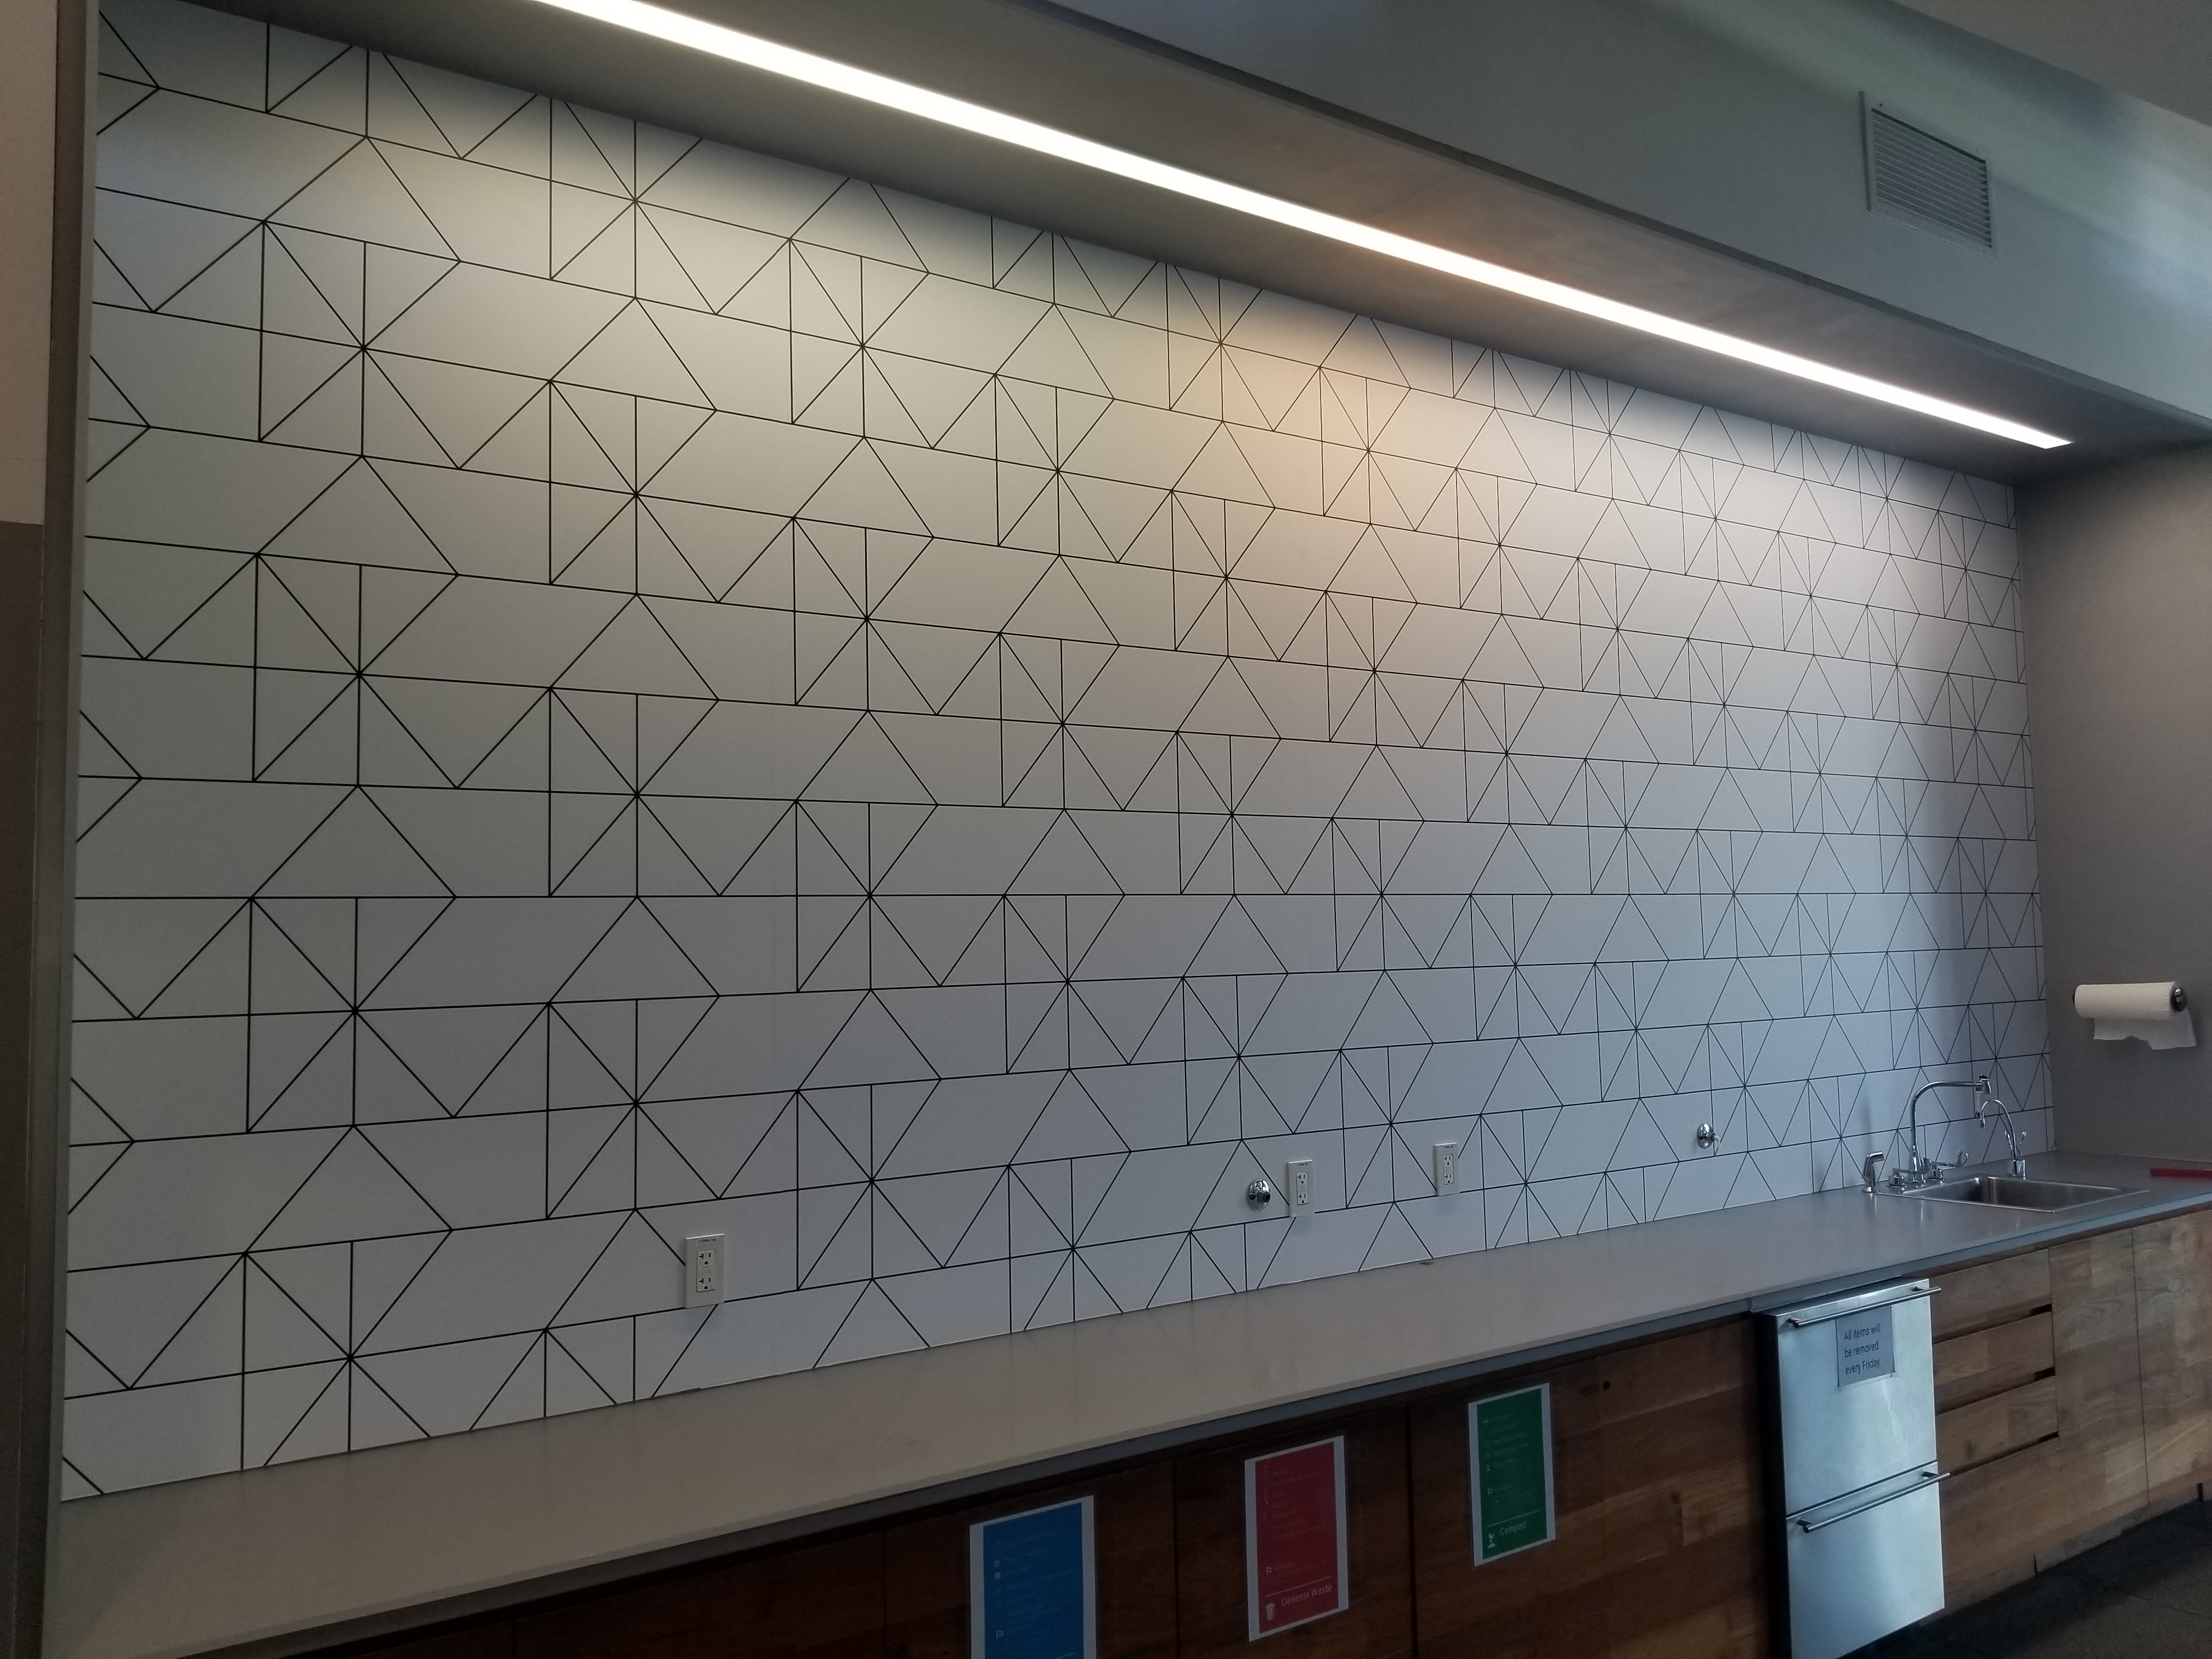 Tech firms need the right background that's conducive for the work they do, like this office wall wrap we installed for Youtube in Mountain View